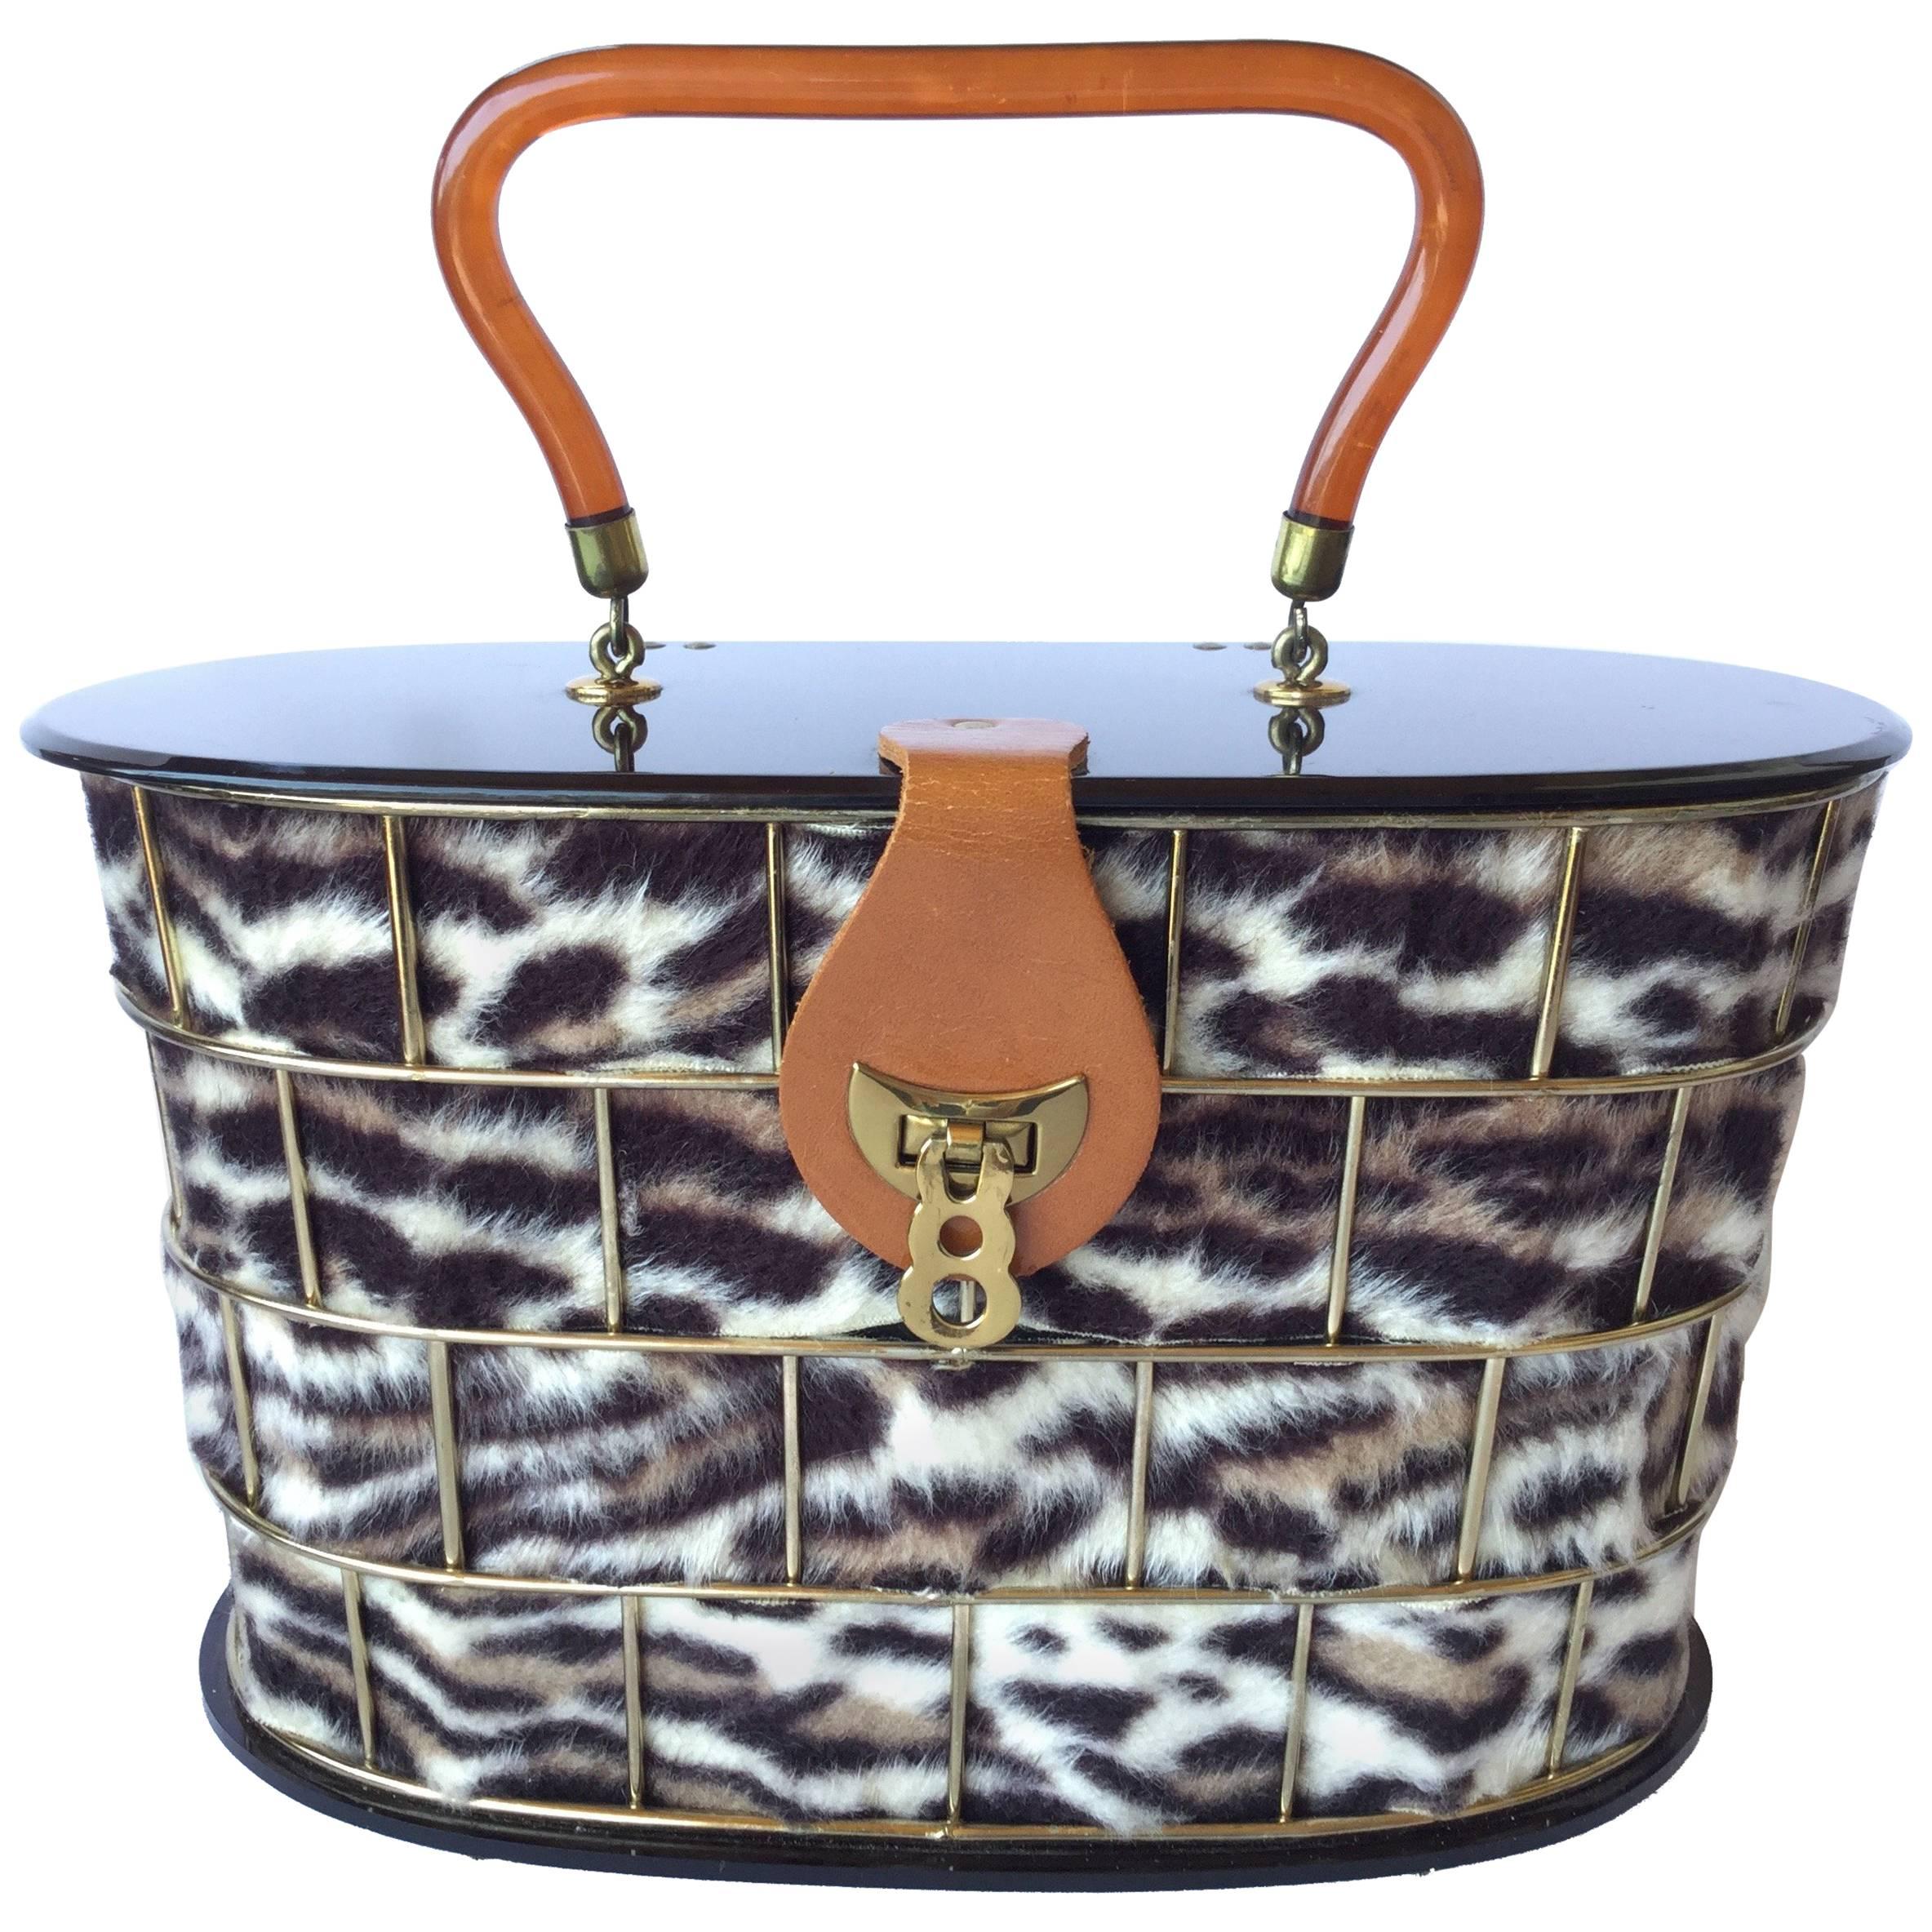 1950's Dorset Rex Cage Bag with Lucite and Faux Leopard. Large Scale.